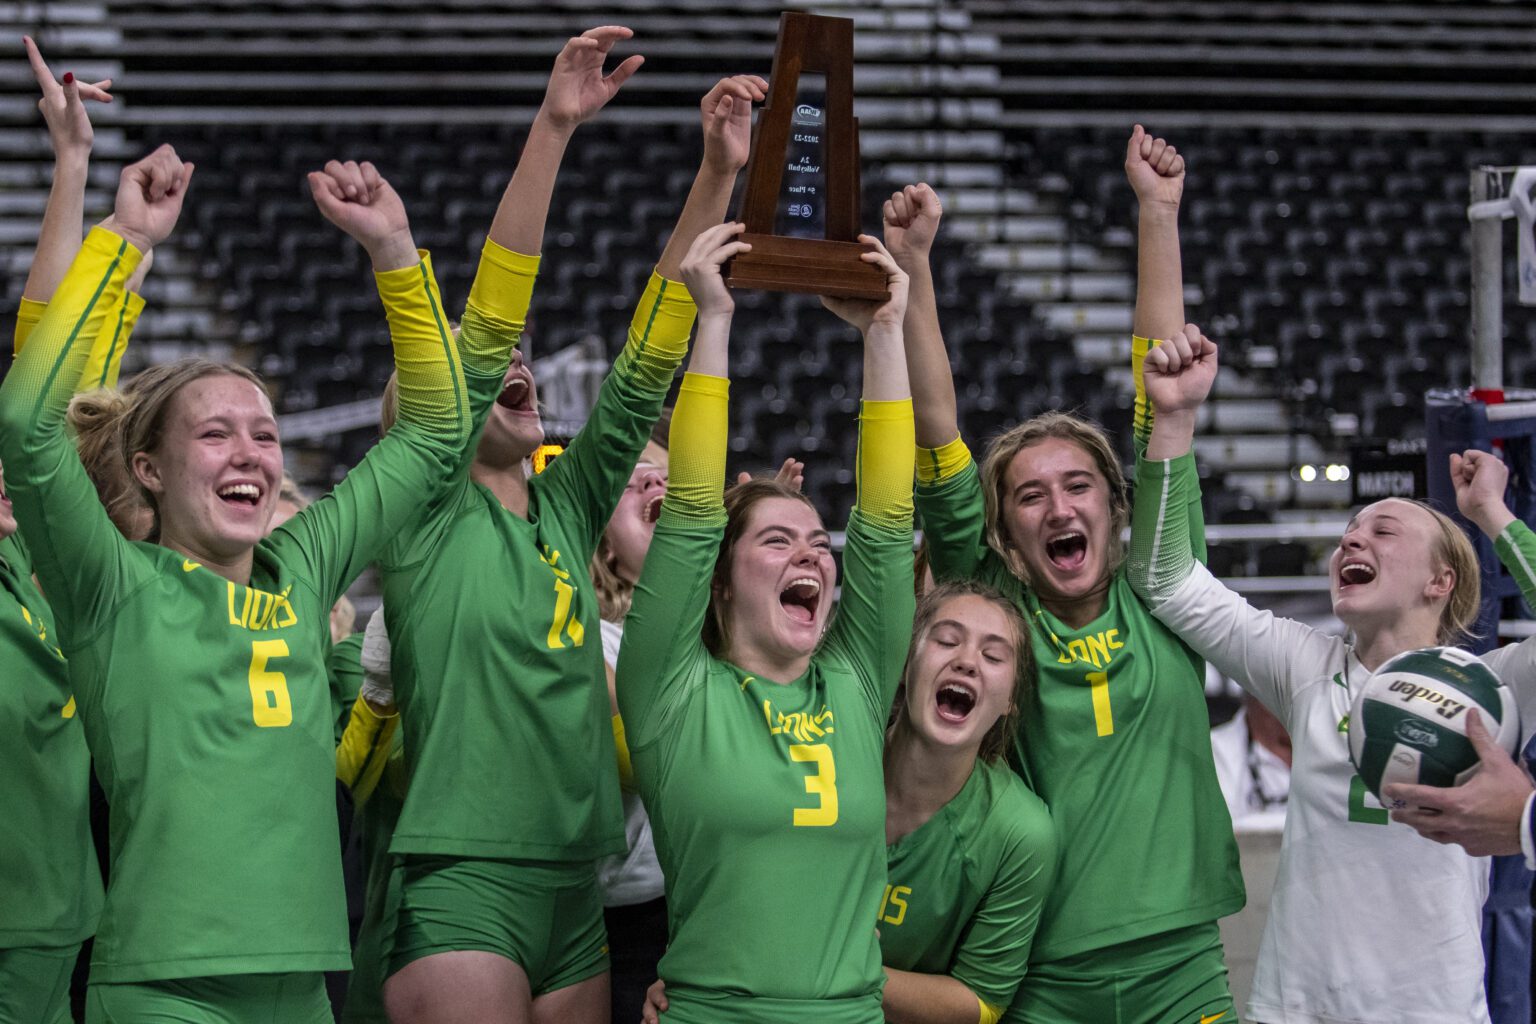 Lynden volleyball players celebrate and lift the fifth-place trophy after defeating Washington of Tacoma at the 2A state tournament in Yakima on Nov. 19.